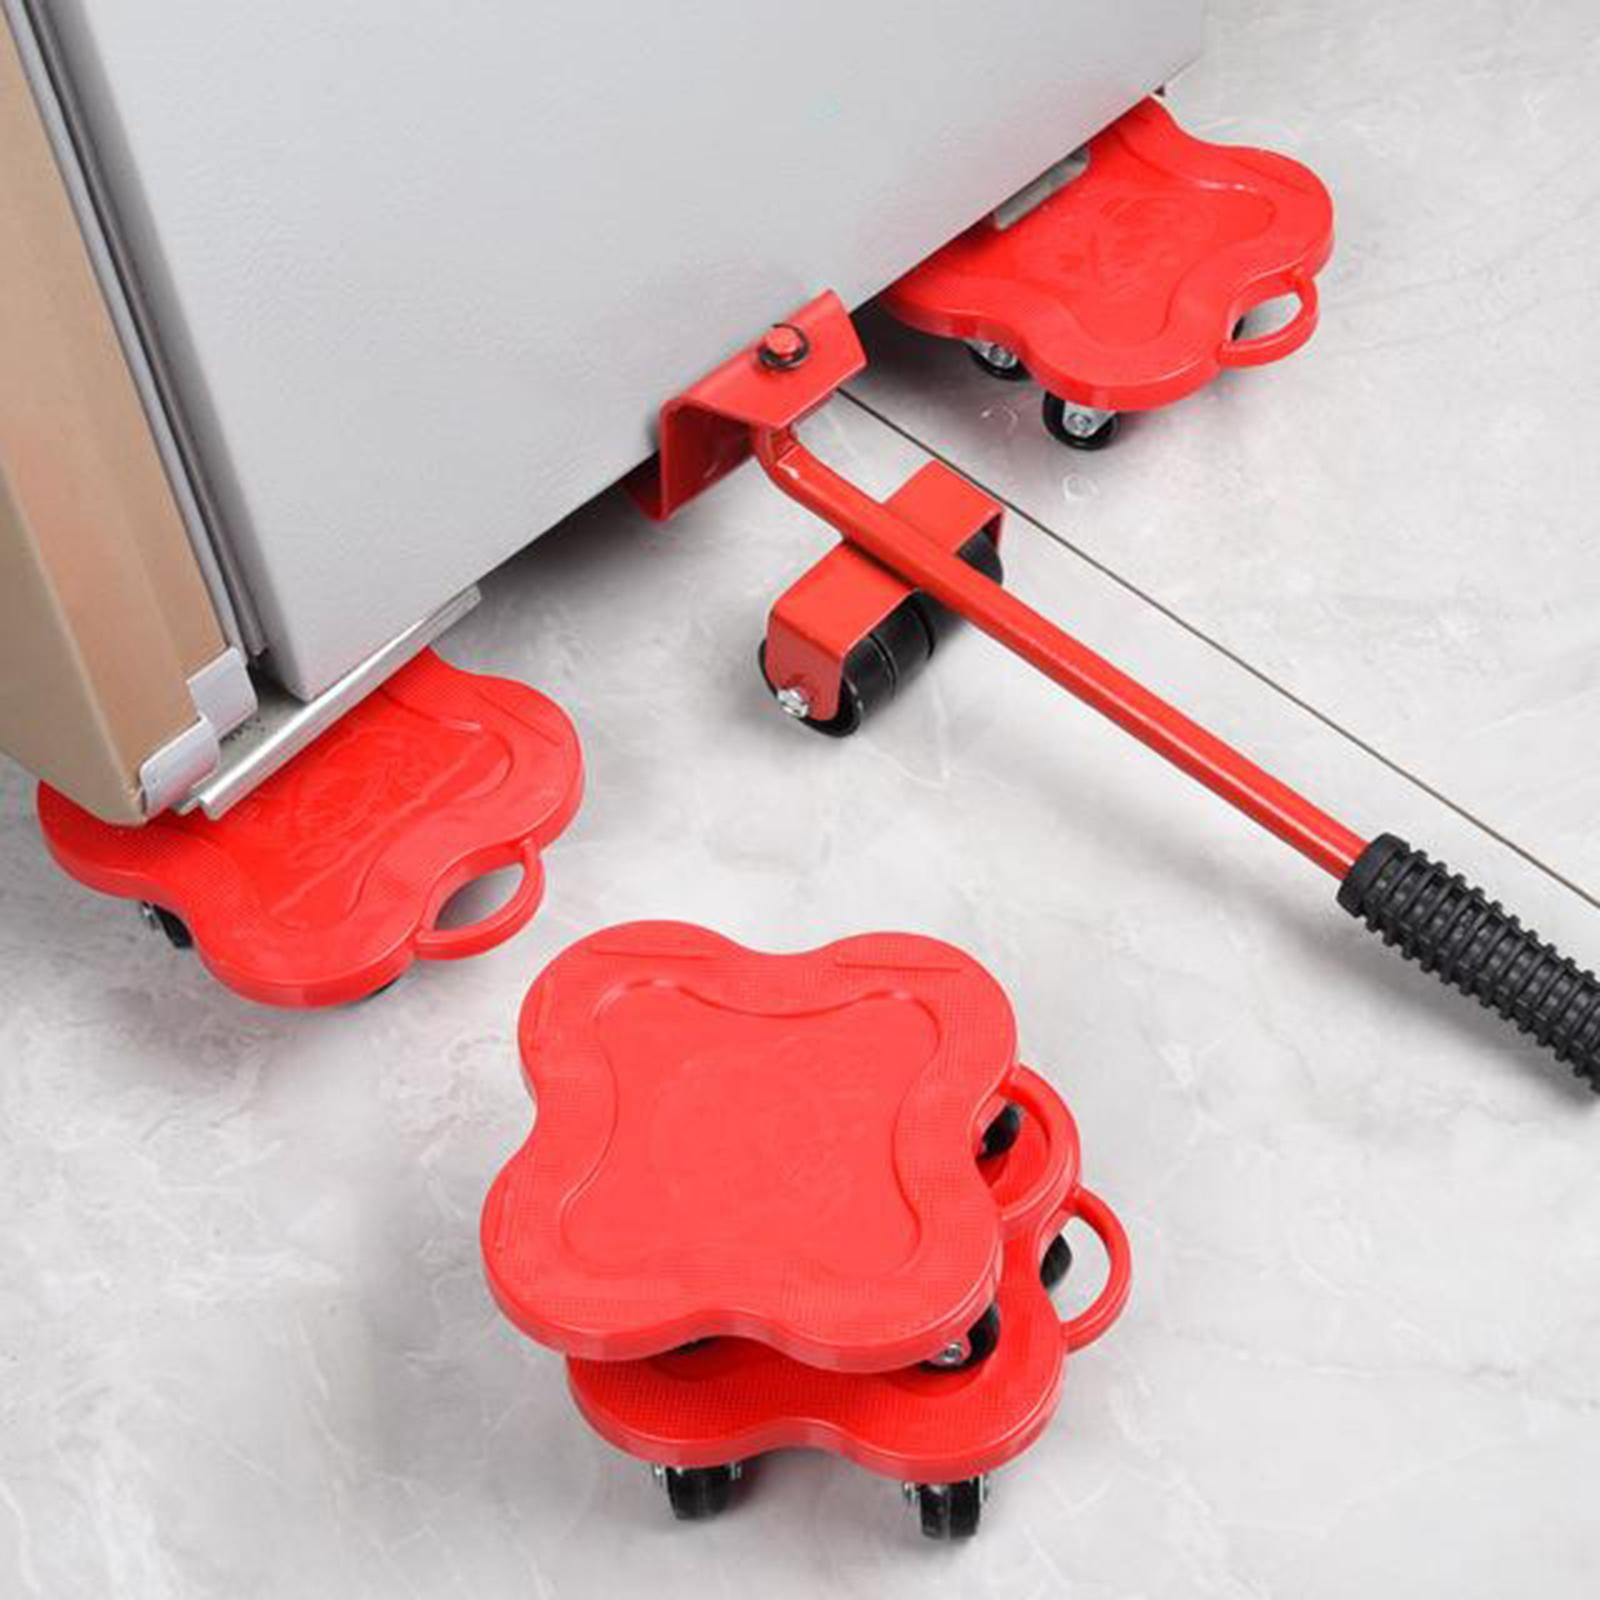 BTEC Furniture Lift Mover Tool Set, Furniture Lifter with 4 Sliders,  Furniture Movers for Heavy Furniture (Red)